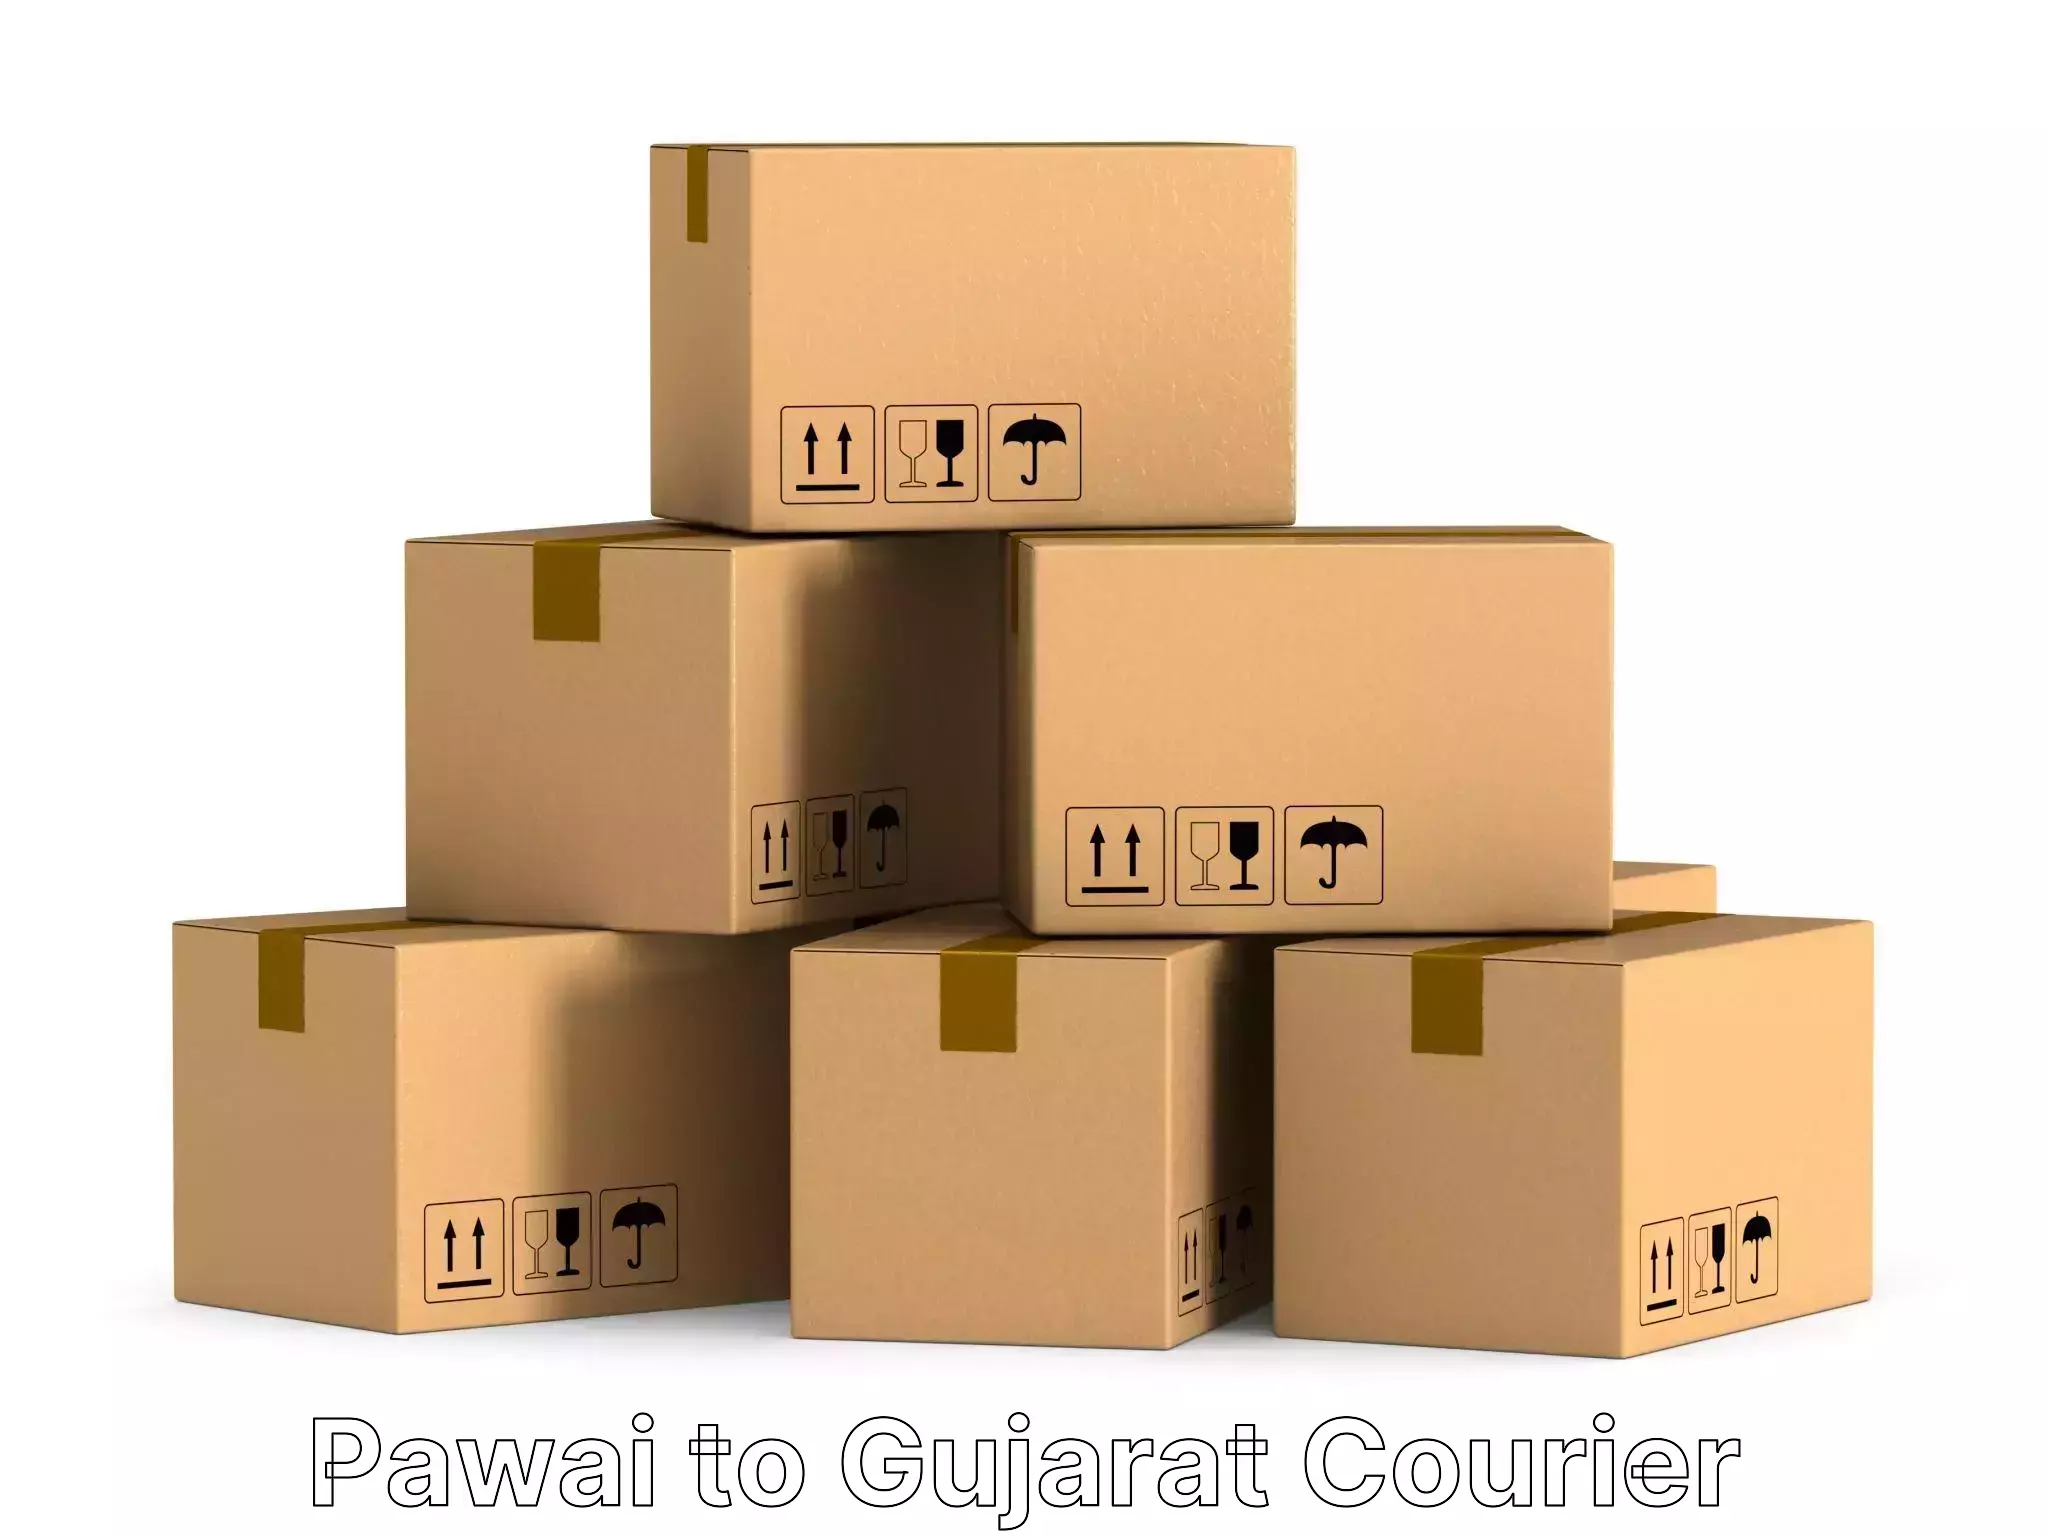 Hassle-free relocation Pawai to Gujarat